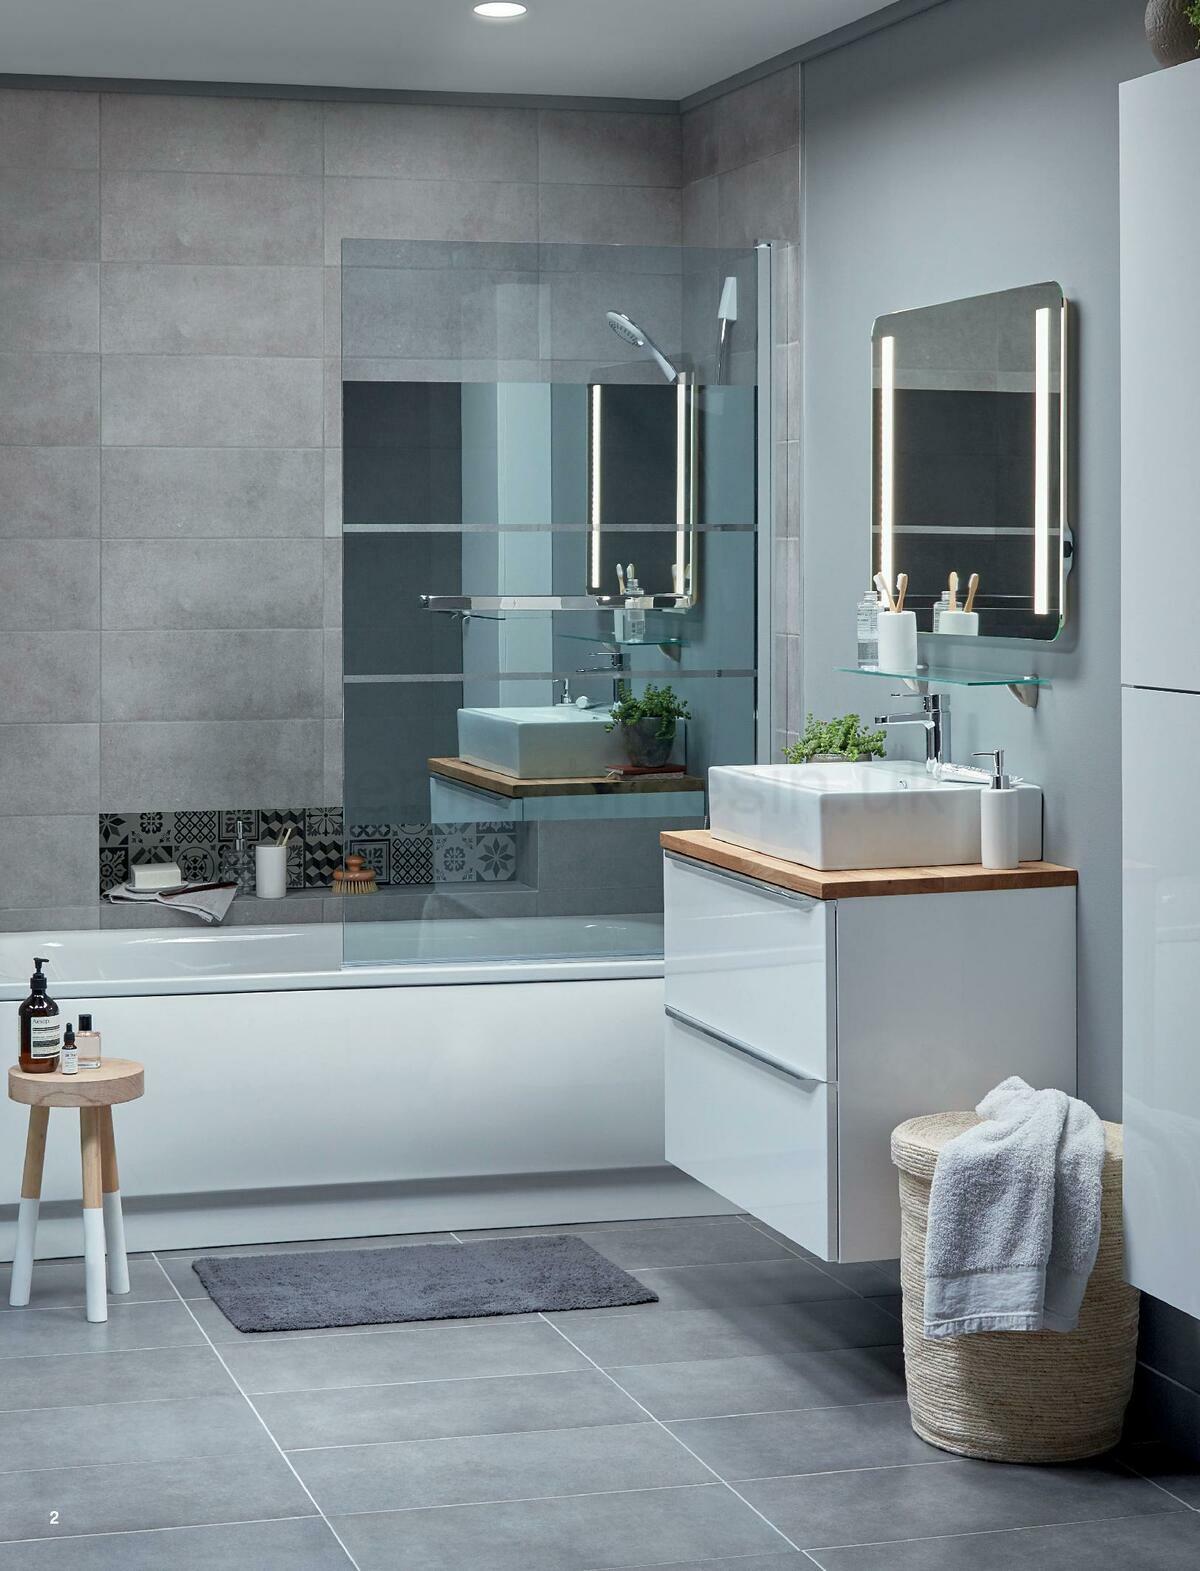 B&Q Bathroom Collections Offers from 1 November